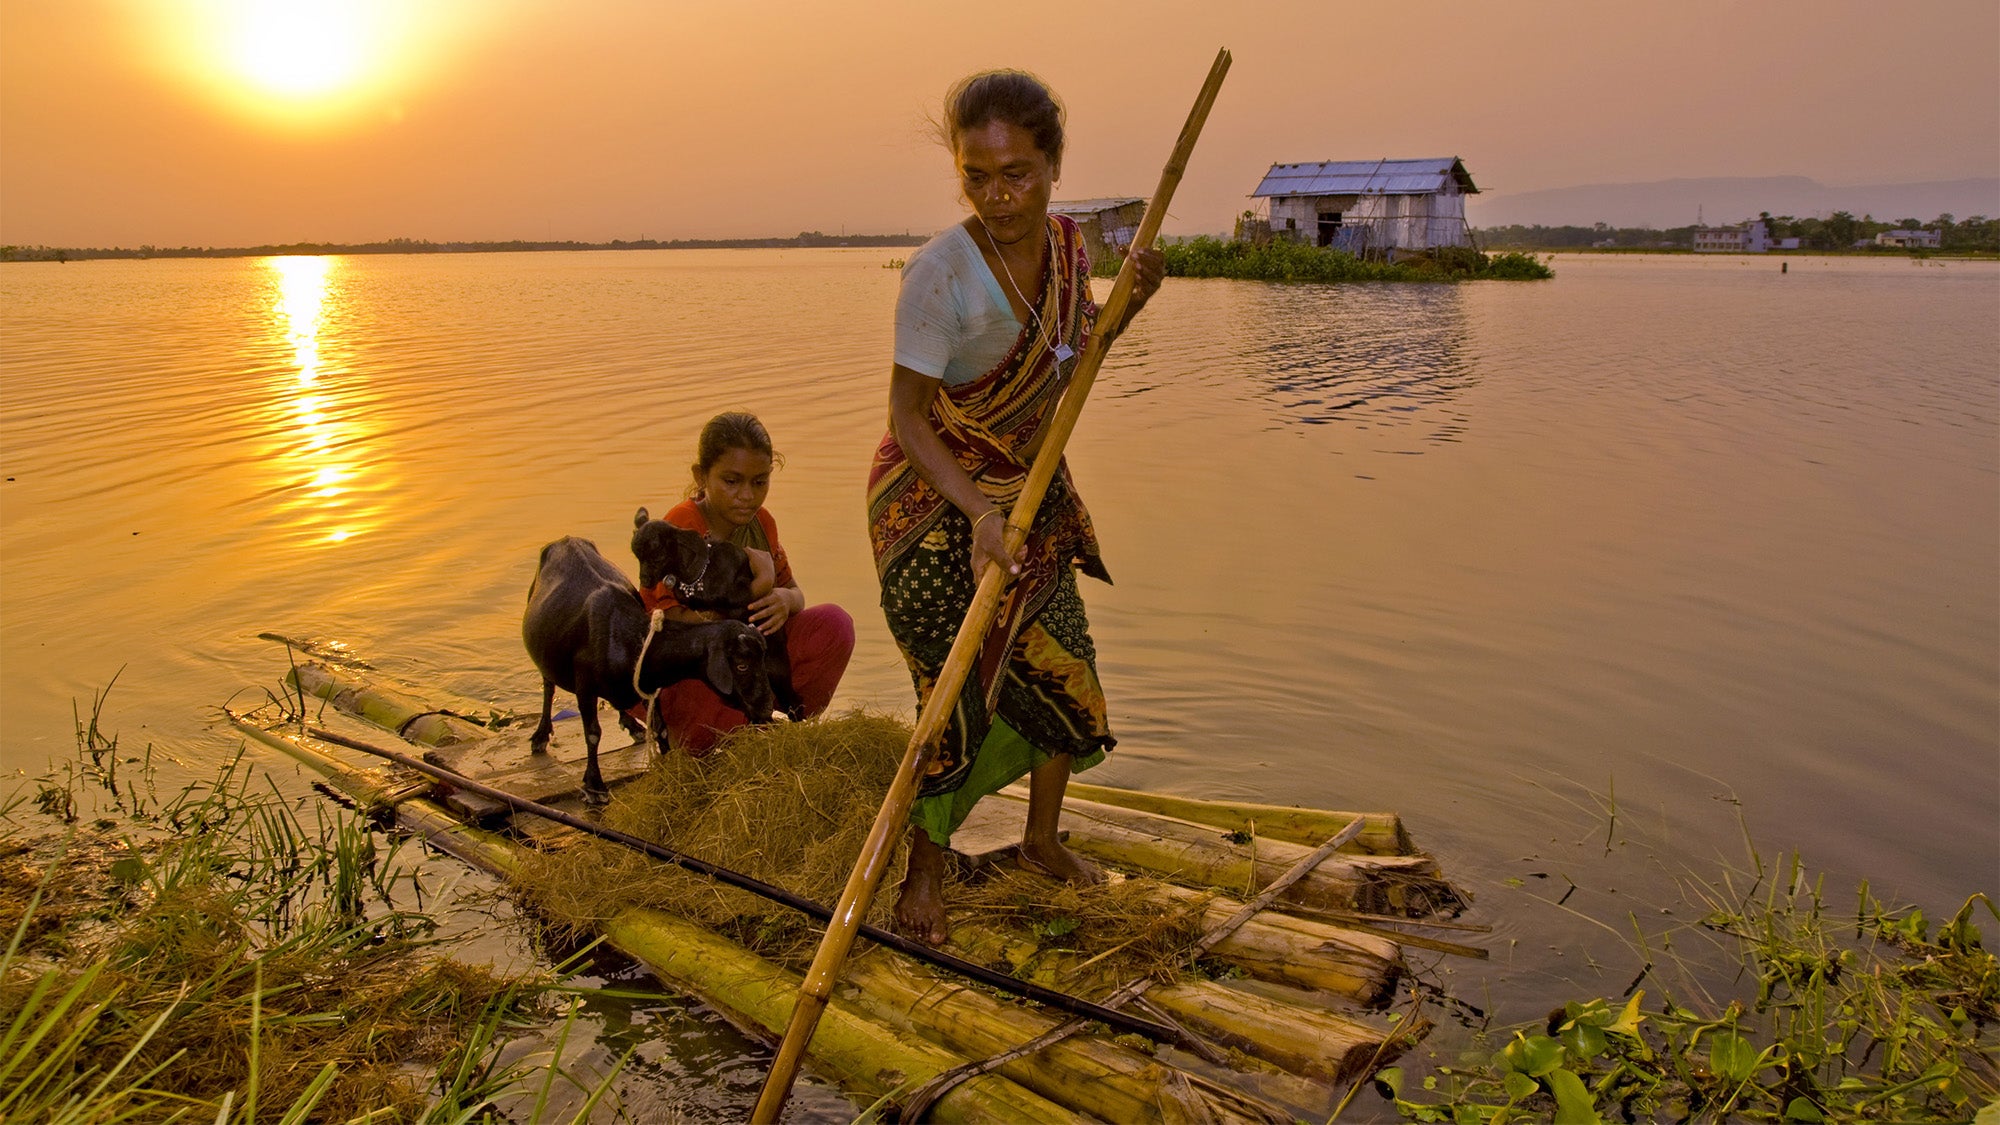 A woman pushes a wooden raft with a goat and child on it